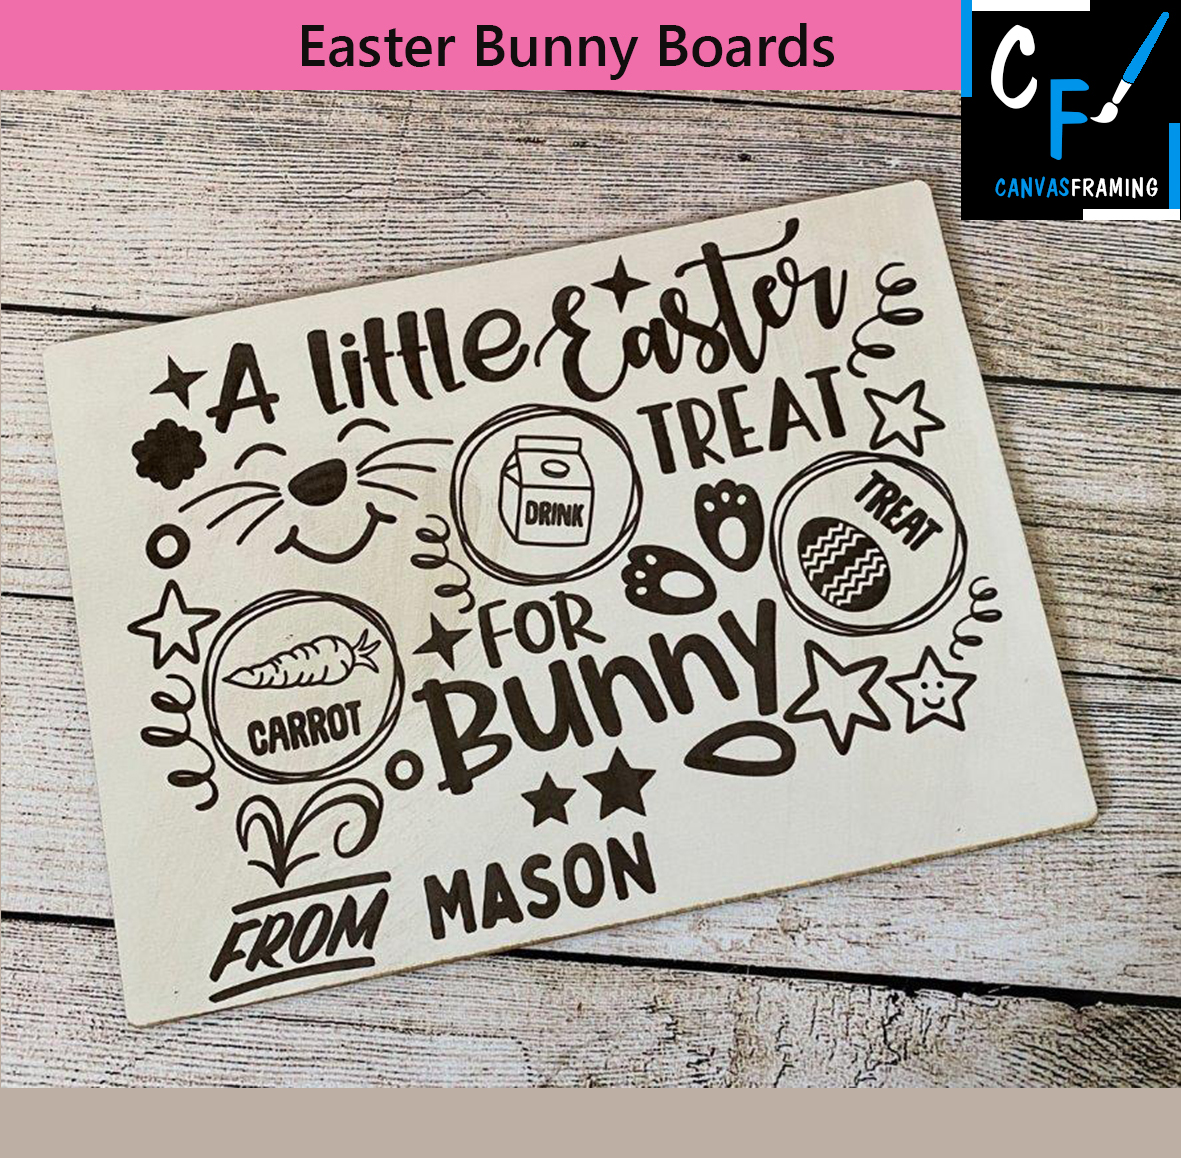 Easter Bunny Boards